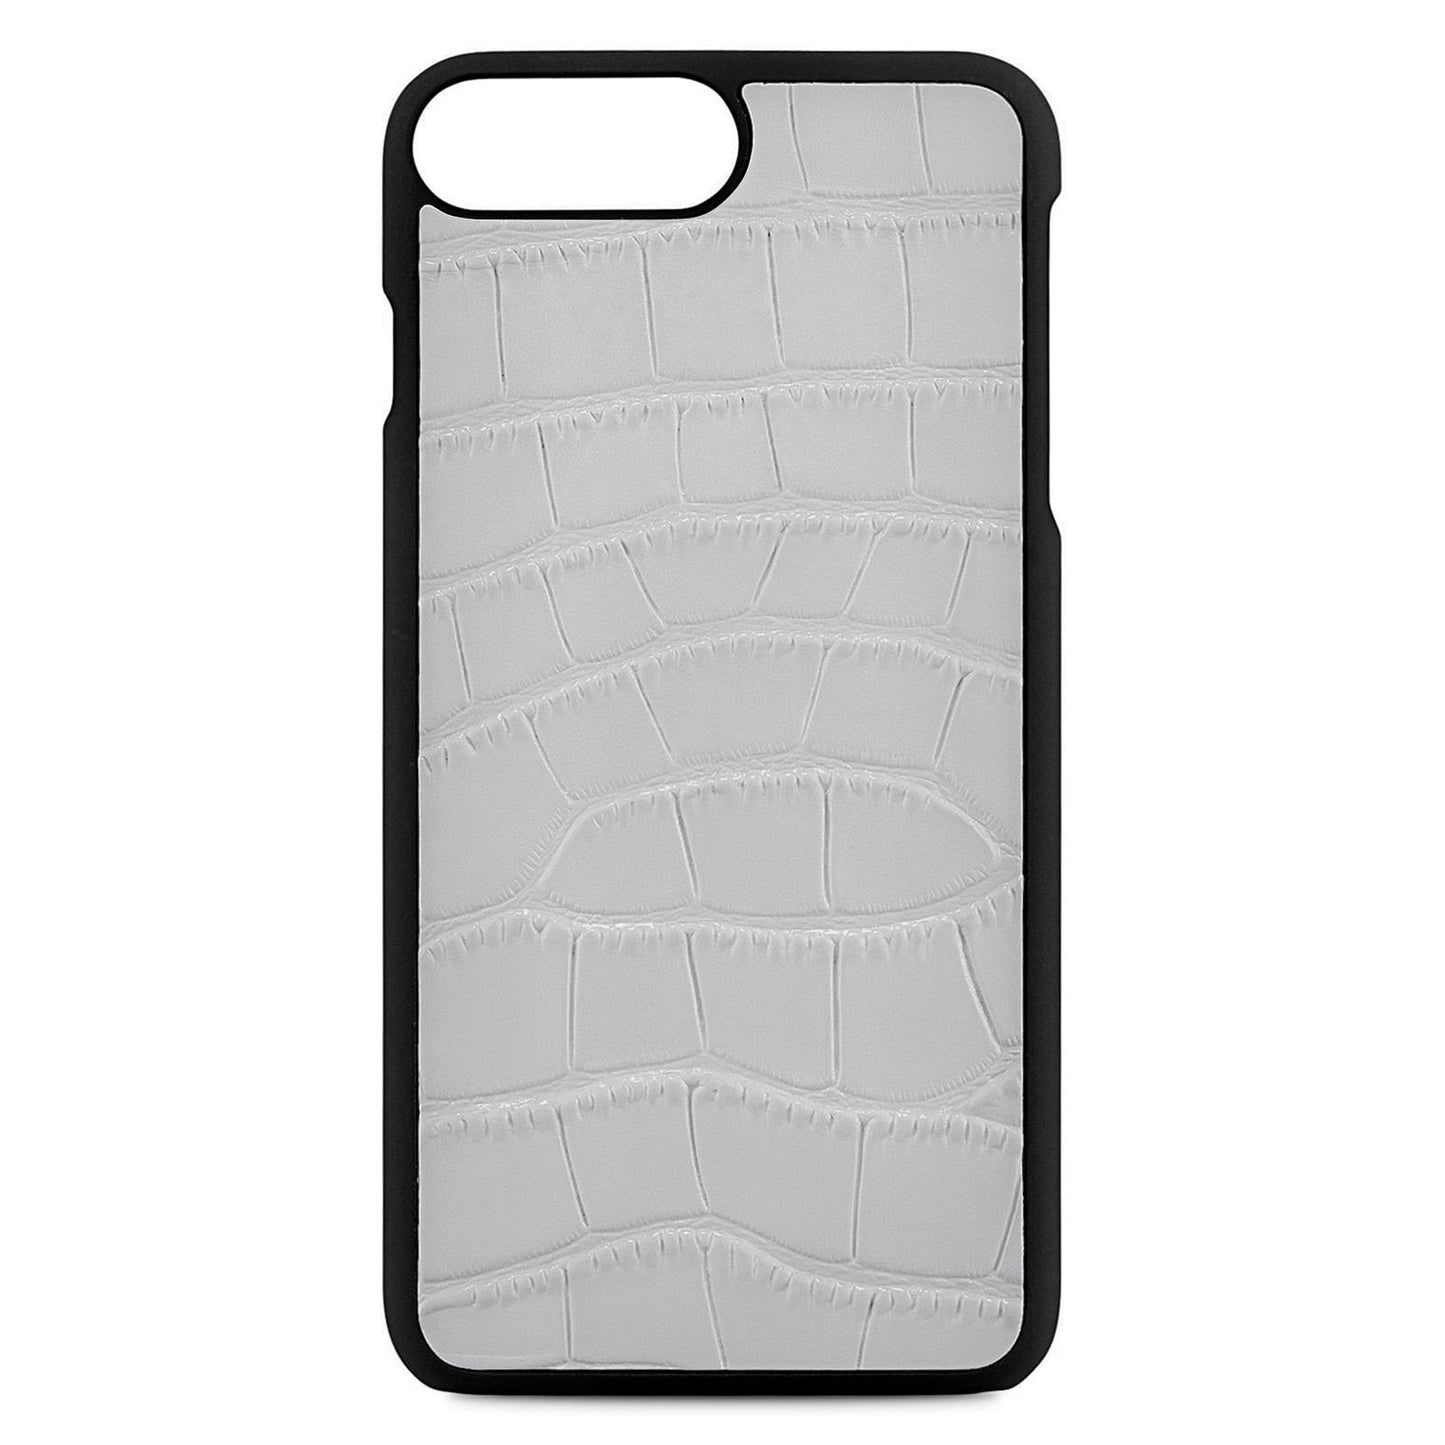 Blank Personalised Grey Croc Leather iPhone 8 Plus Case